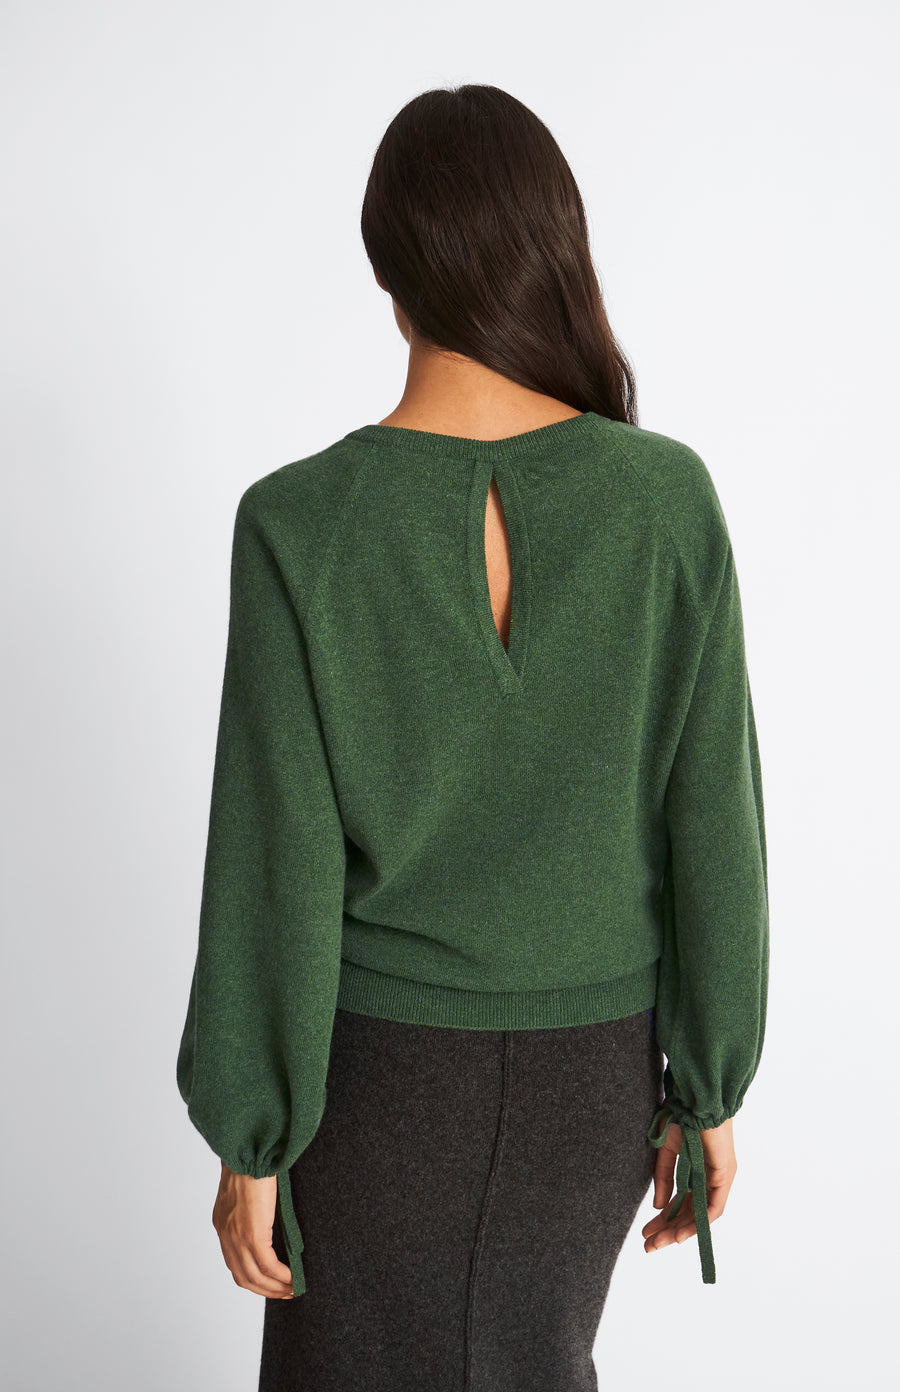 Pringle Women's Lightweight Round Neck Cashmere Jumper in Moss Green rear view showing back opening